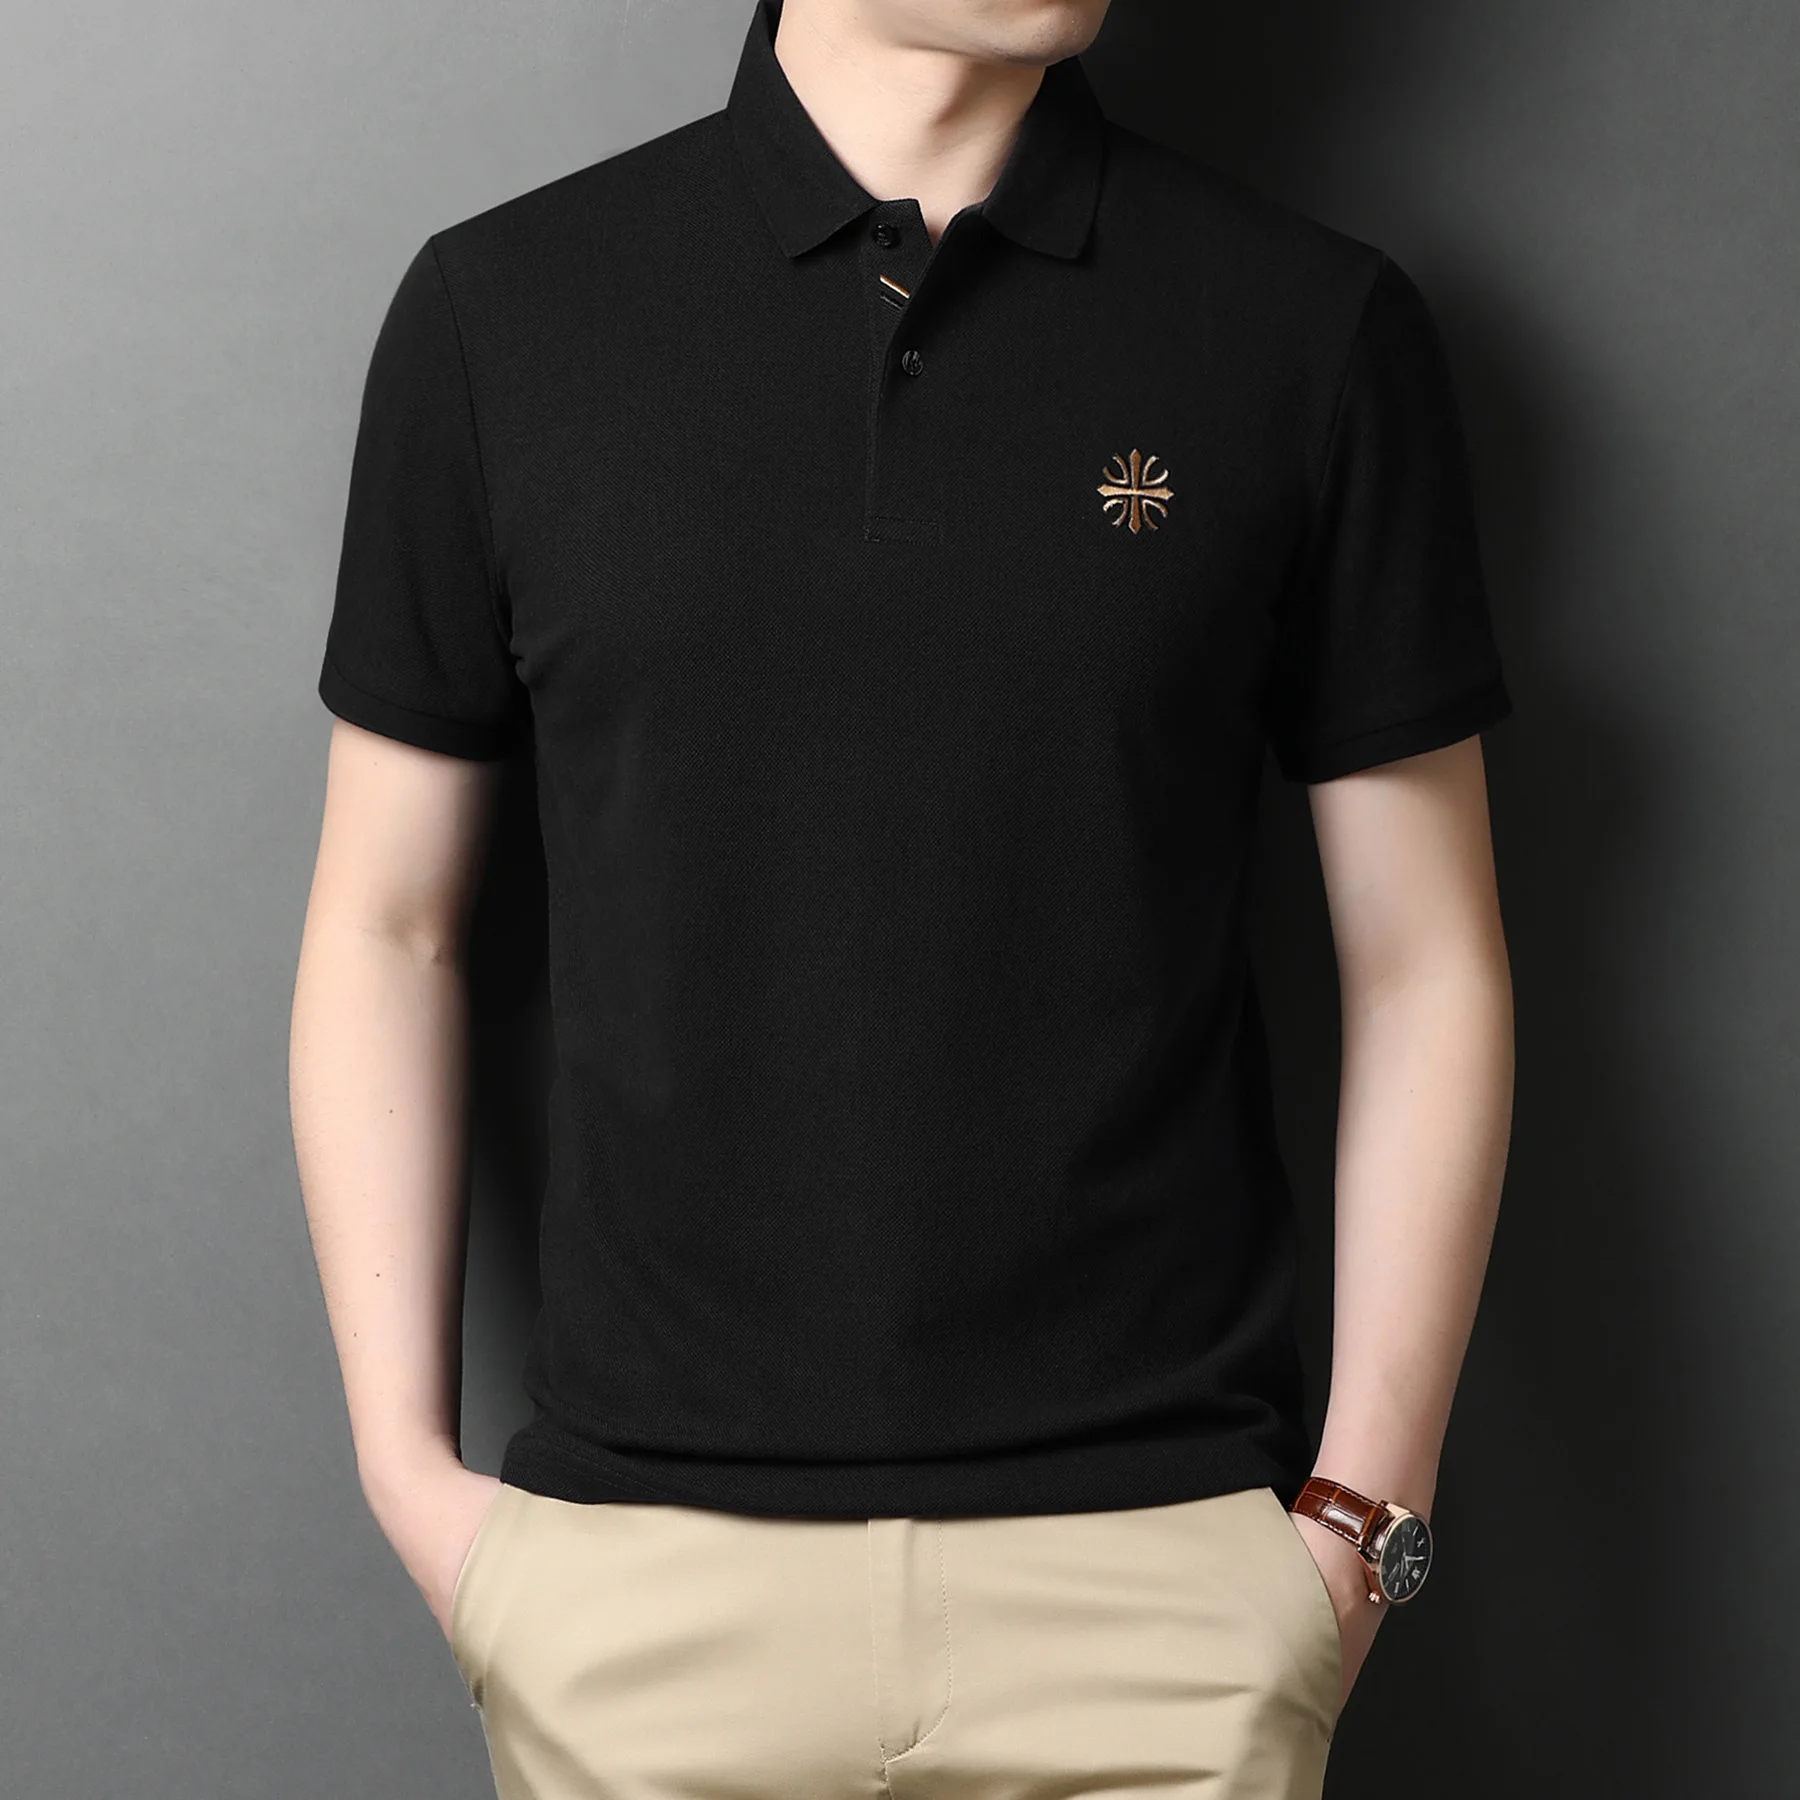 2022 New Men'sNational Collar Summer Polo Shirt Fashion Brand Clothing Slim Fit T-Shirt Solid Color Breathable ButtonCasualShirt